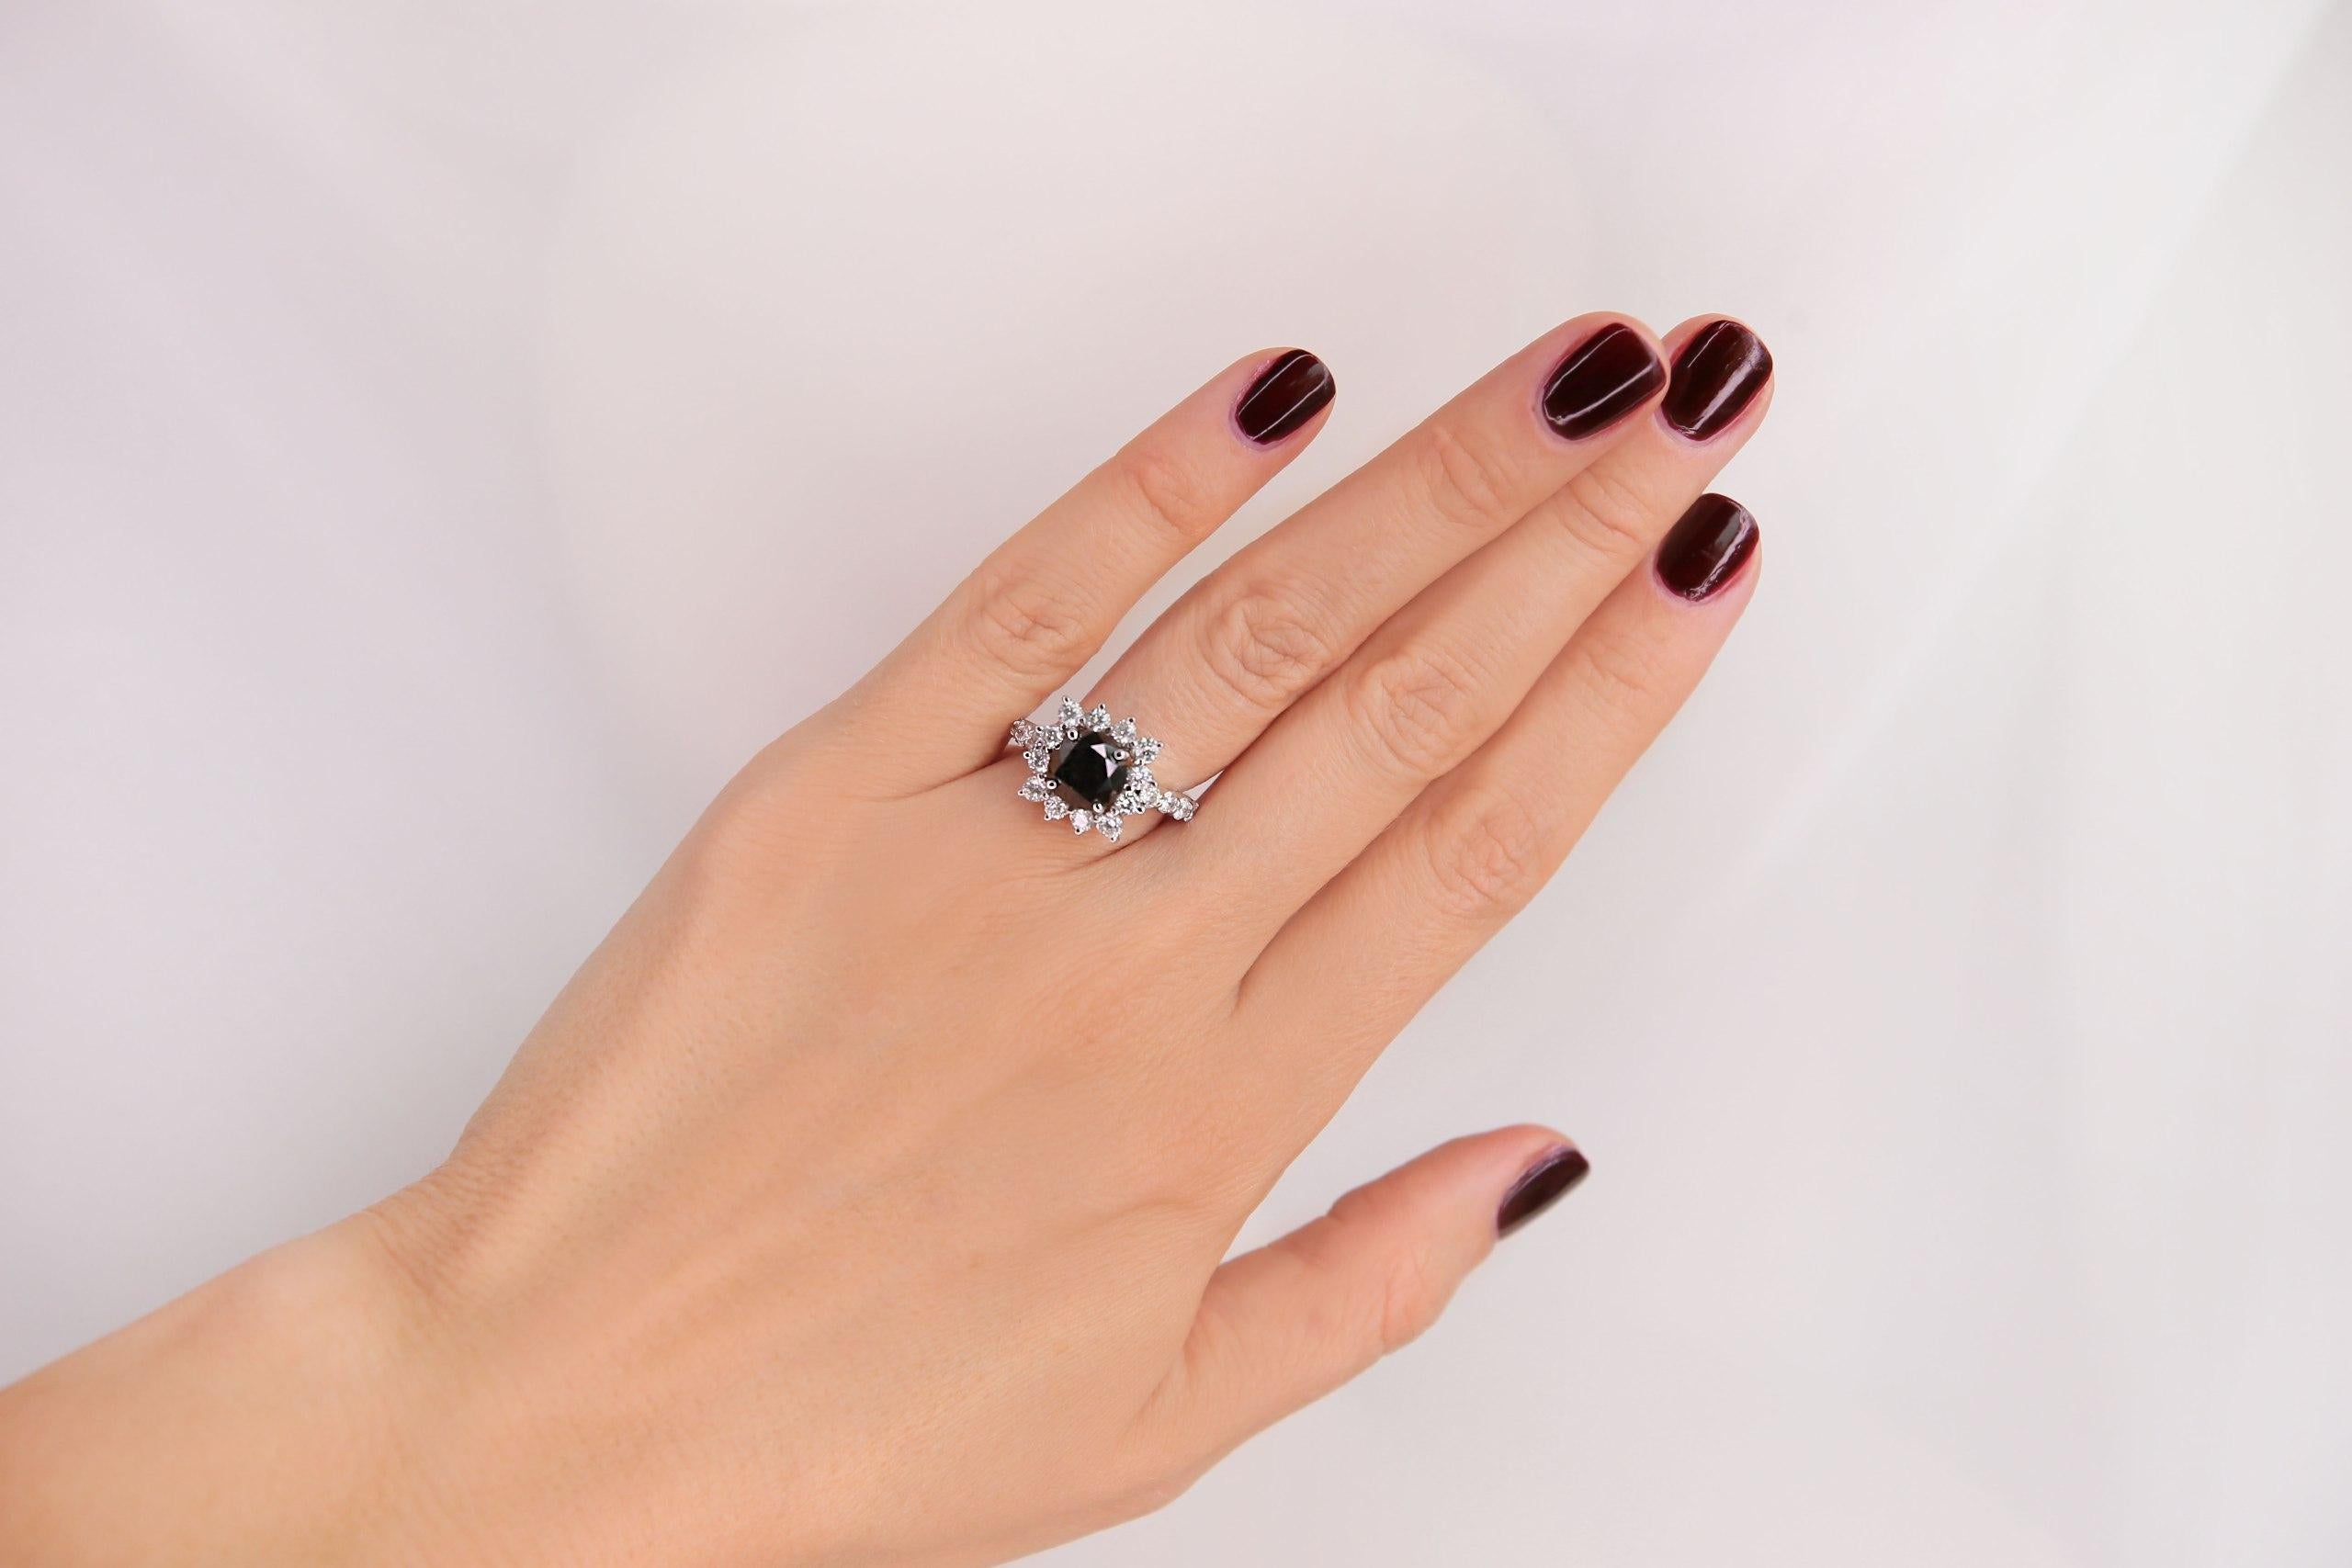 4.75 carat Black Diamond Ring - 14KT White Gold 

Diamond RND 8.38 - 8.31 x 7.29mm, 3.48ct.
Diamond 2.60 - 2.50 x 1.58mm, 
Total weight of 20 Stones = 1.27ct. 
Graded in the setting. Clarity SI-1 to SI-2. 
Color: H - I Cut Good. 
Total Weight of